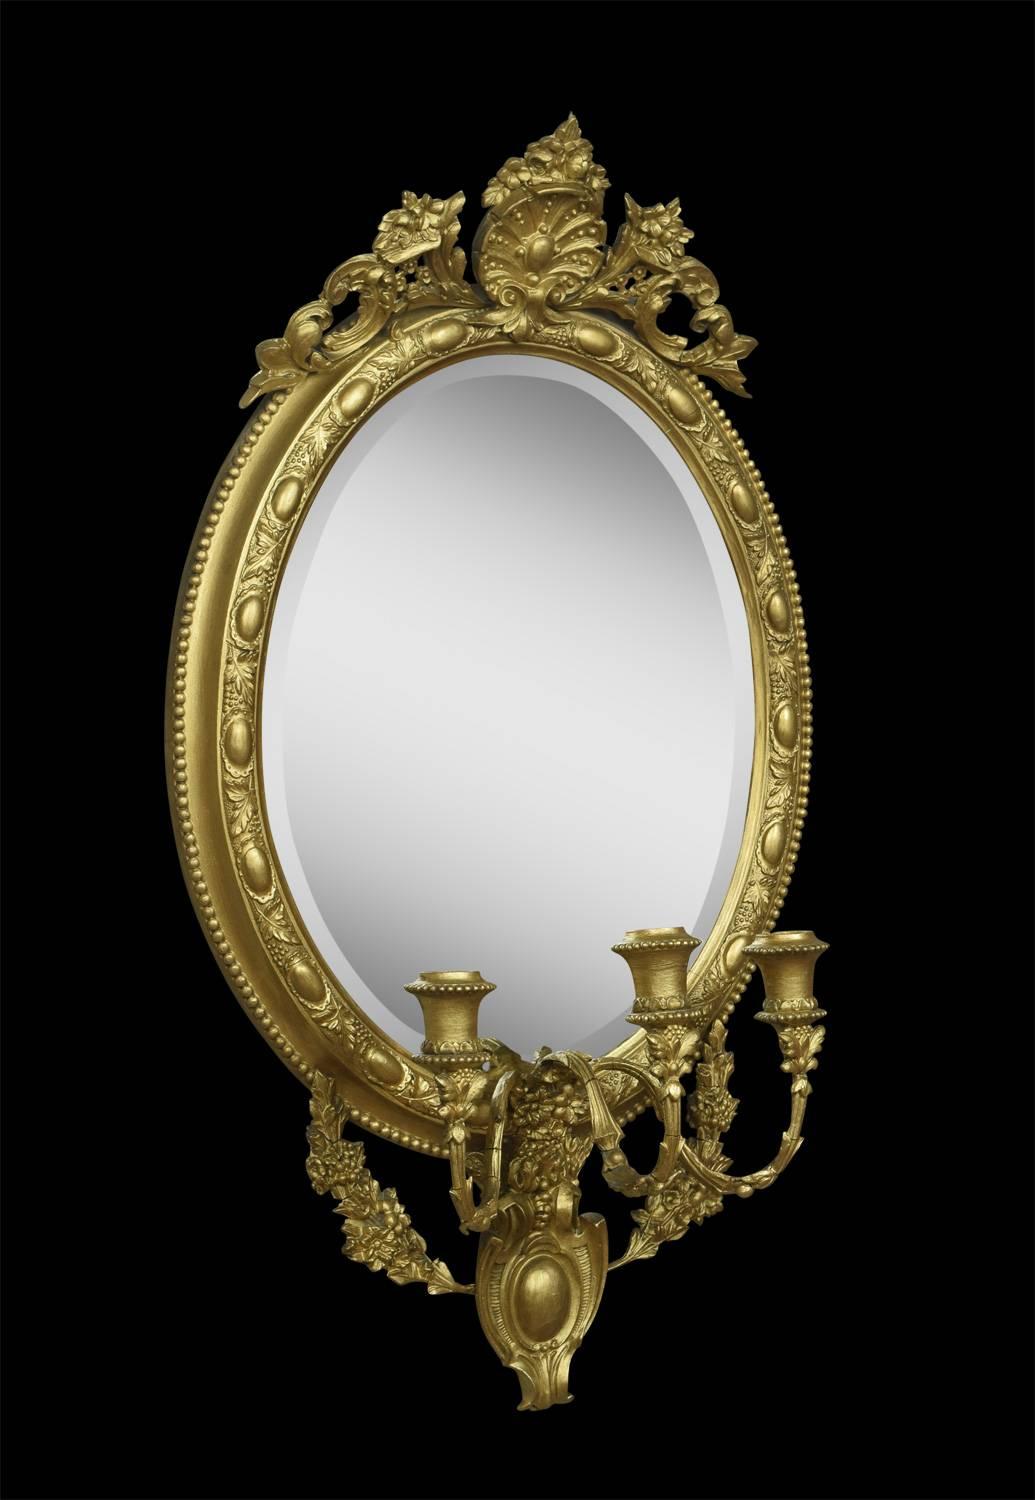 Pair of 19th century gilt composition oval girandoles Mirrors. The cresting centred with a cartouche and foliate scrolls with three candle braches, regilt surrounding the original beveled mirror plate.
Dimensions:
Height 31.5 inches
Width 18